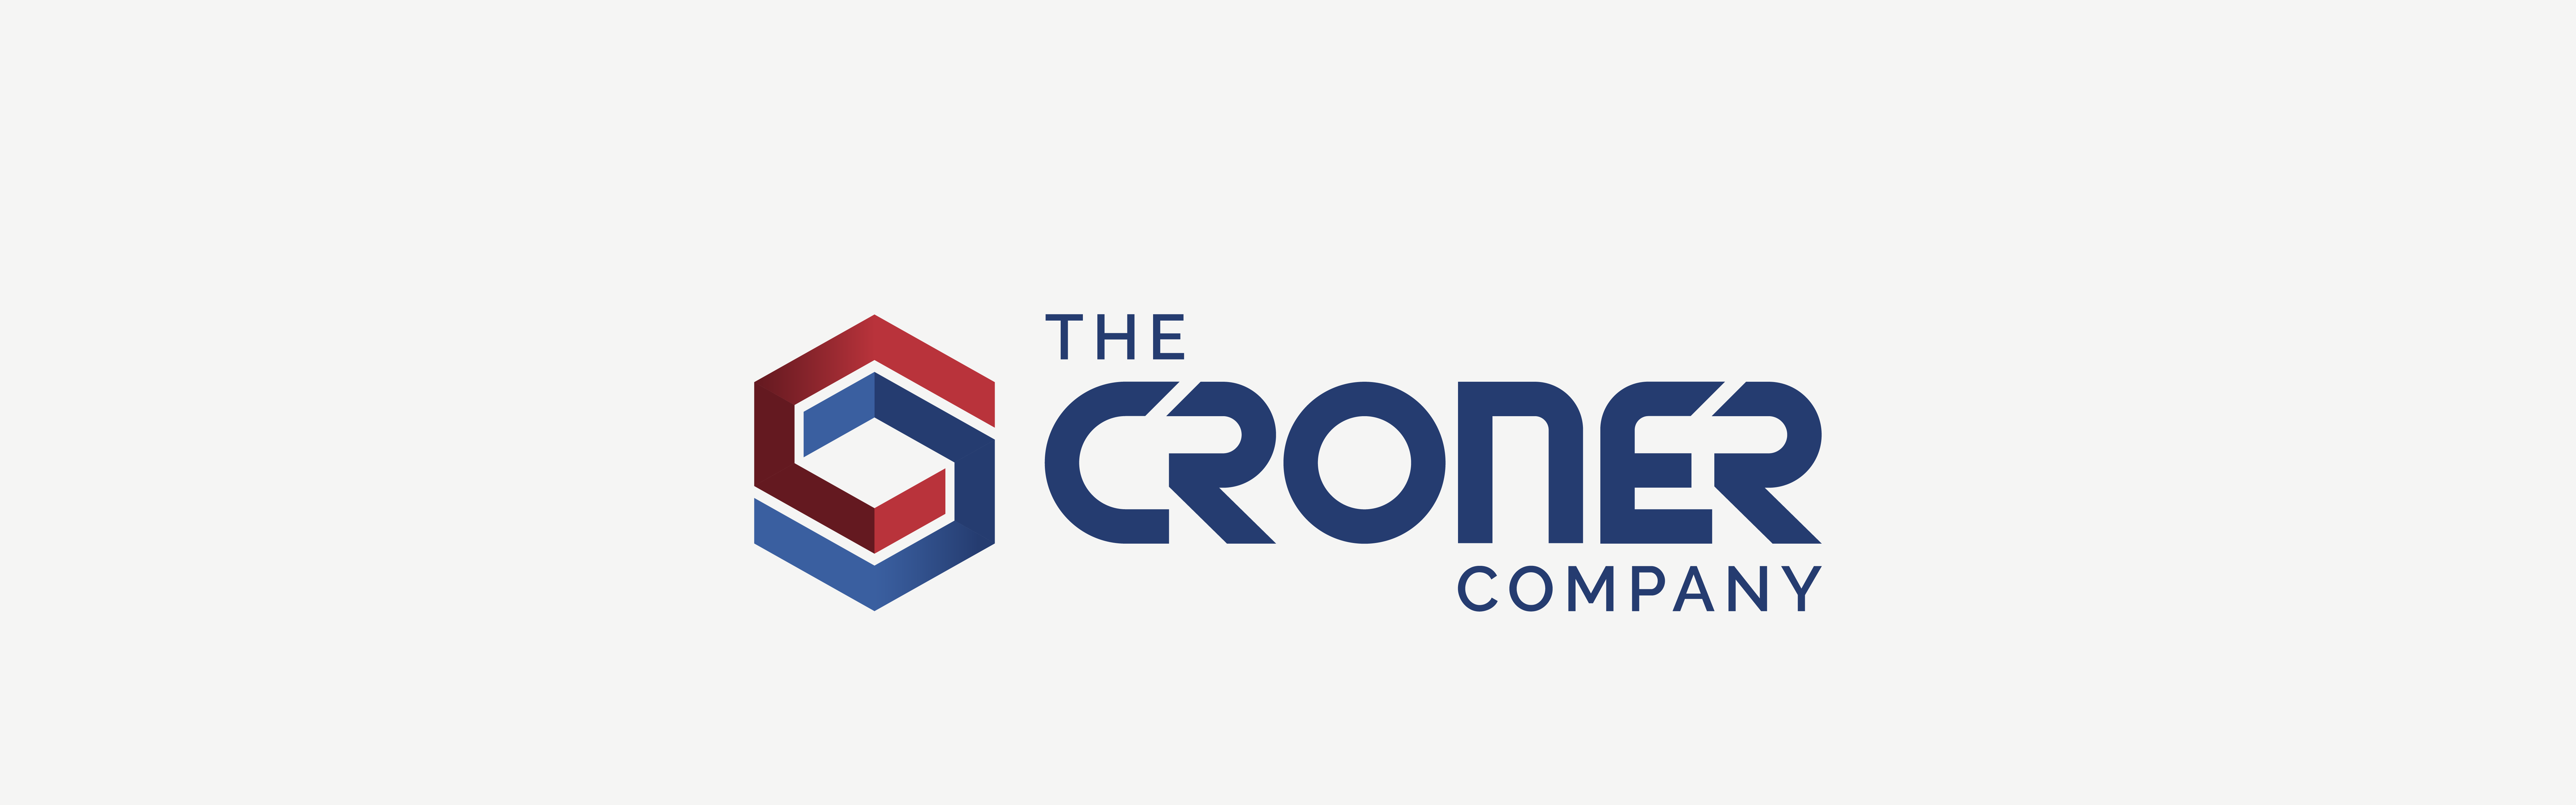 Logo of The Croner Company featuring an emblem with a red and blue hexagon design next to the company name in blue serif font.